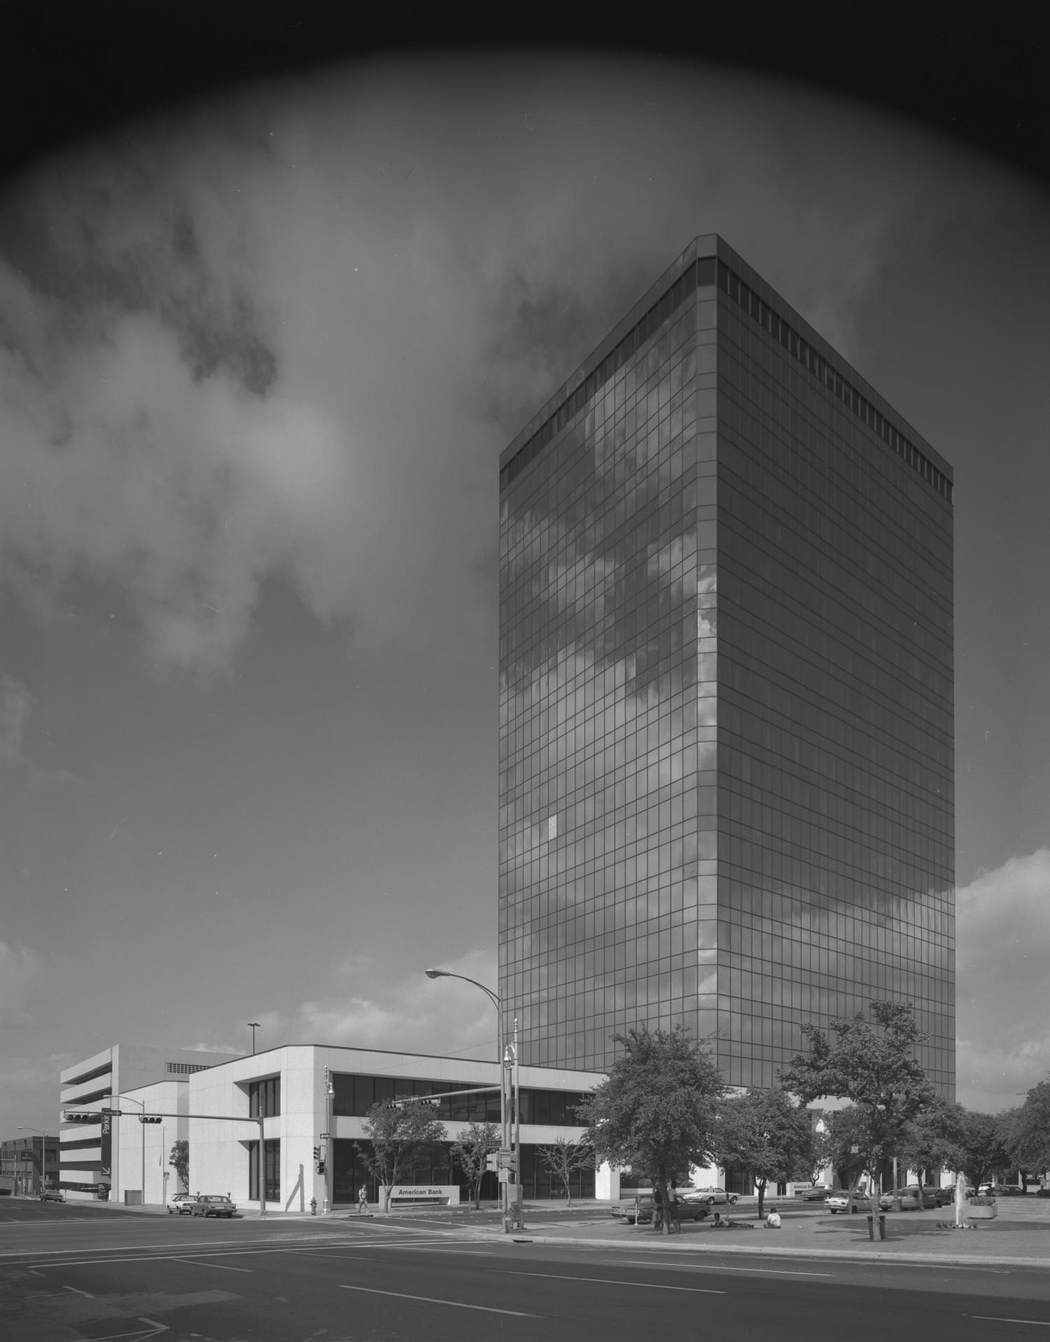 American Bank Exterior, 1978. The building stands on the corner of West 6th Street and Colorado Street.